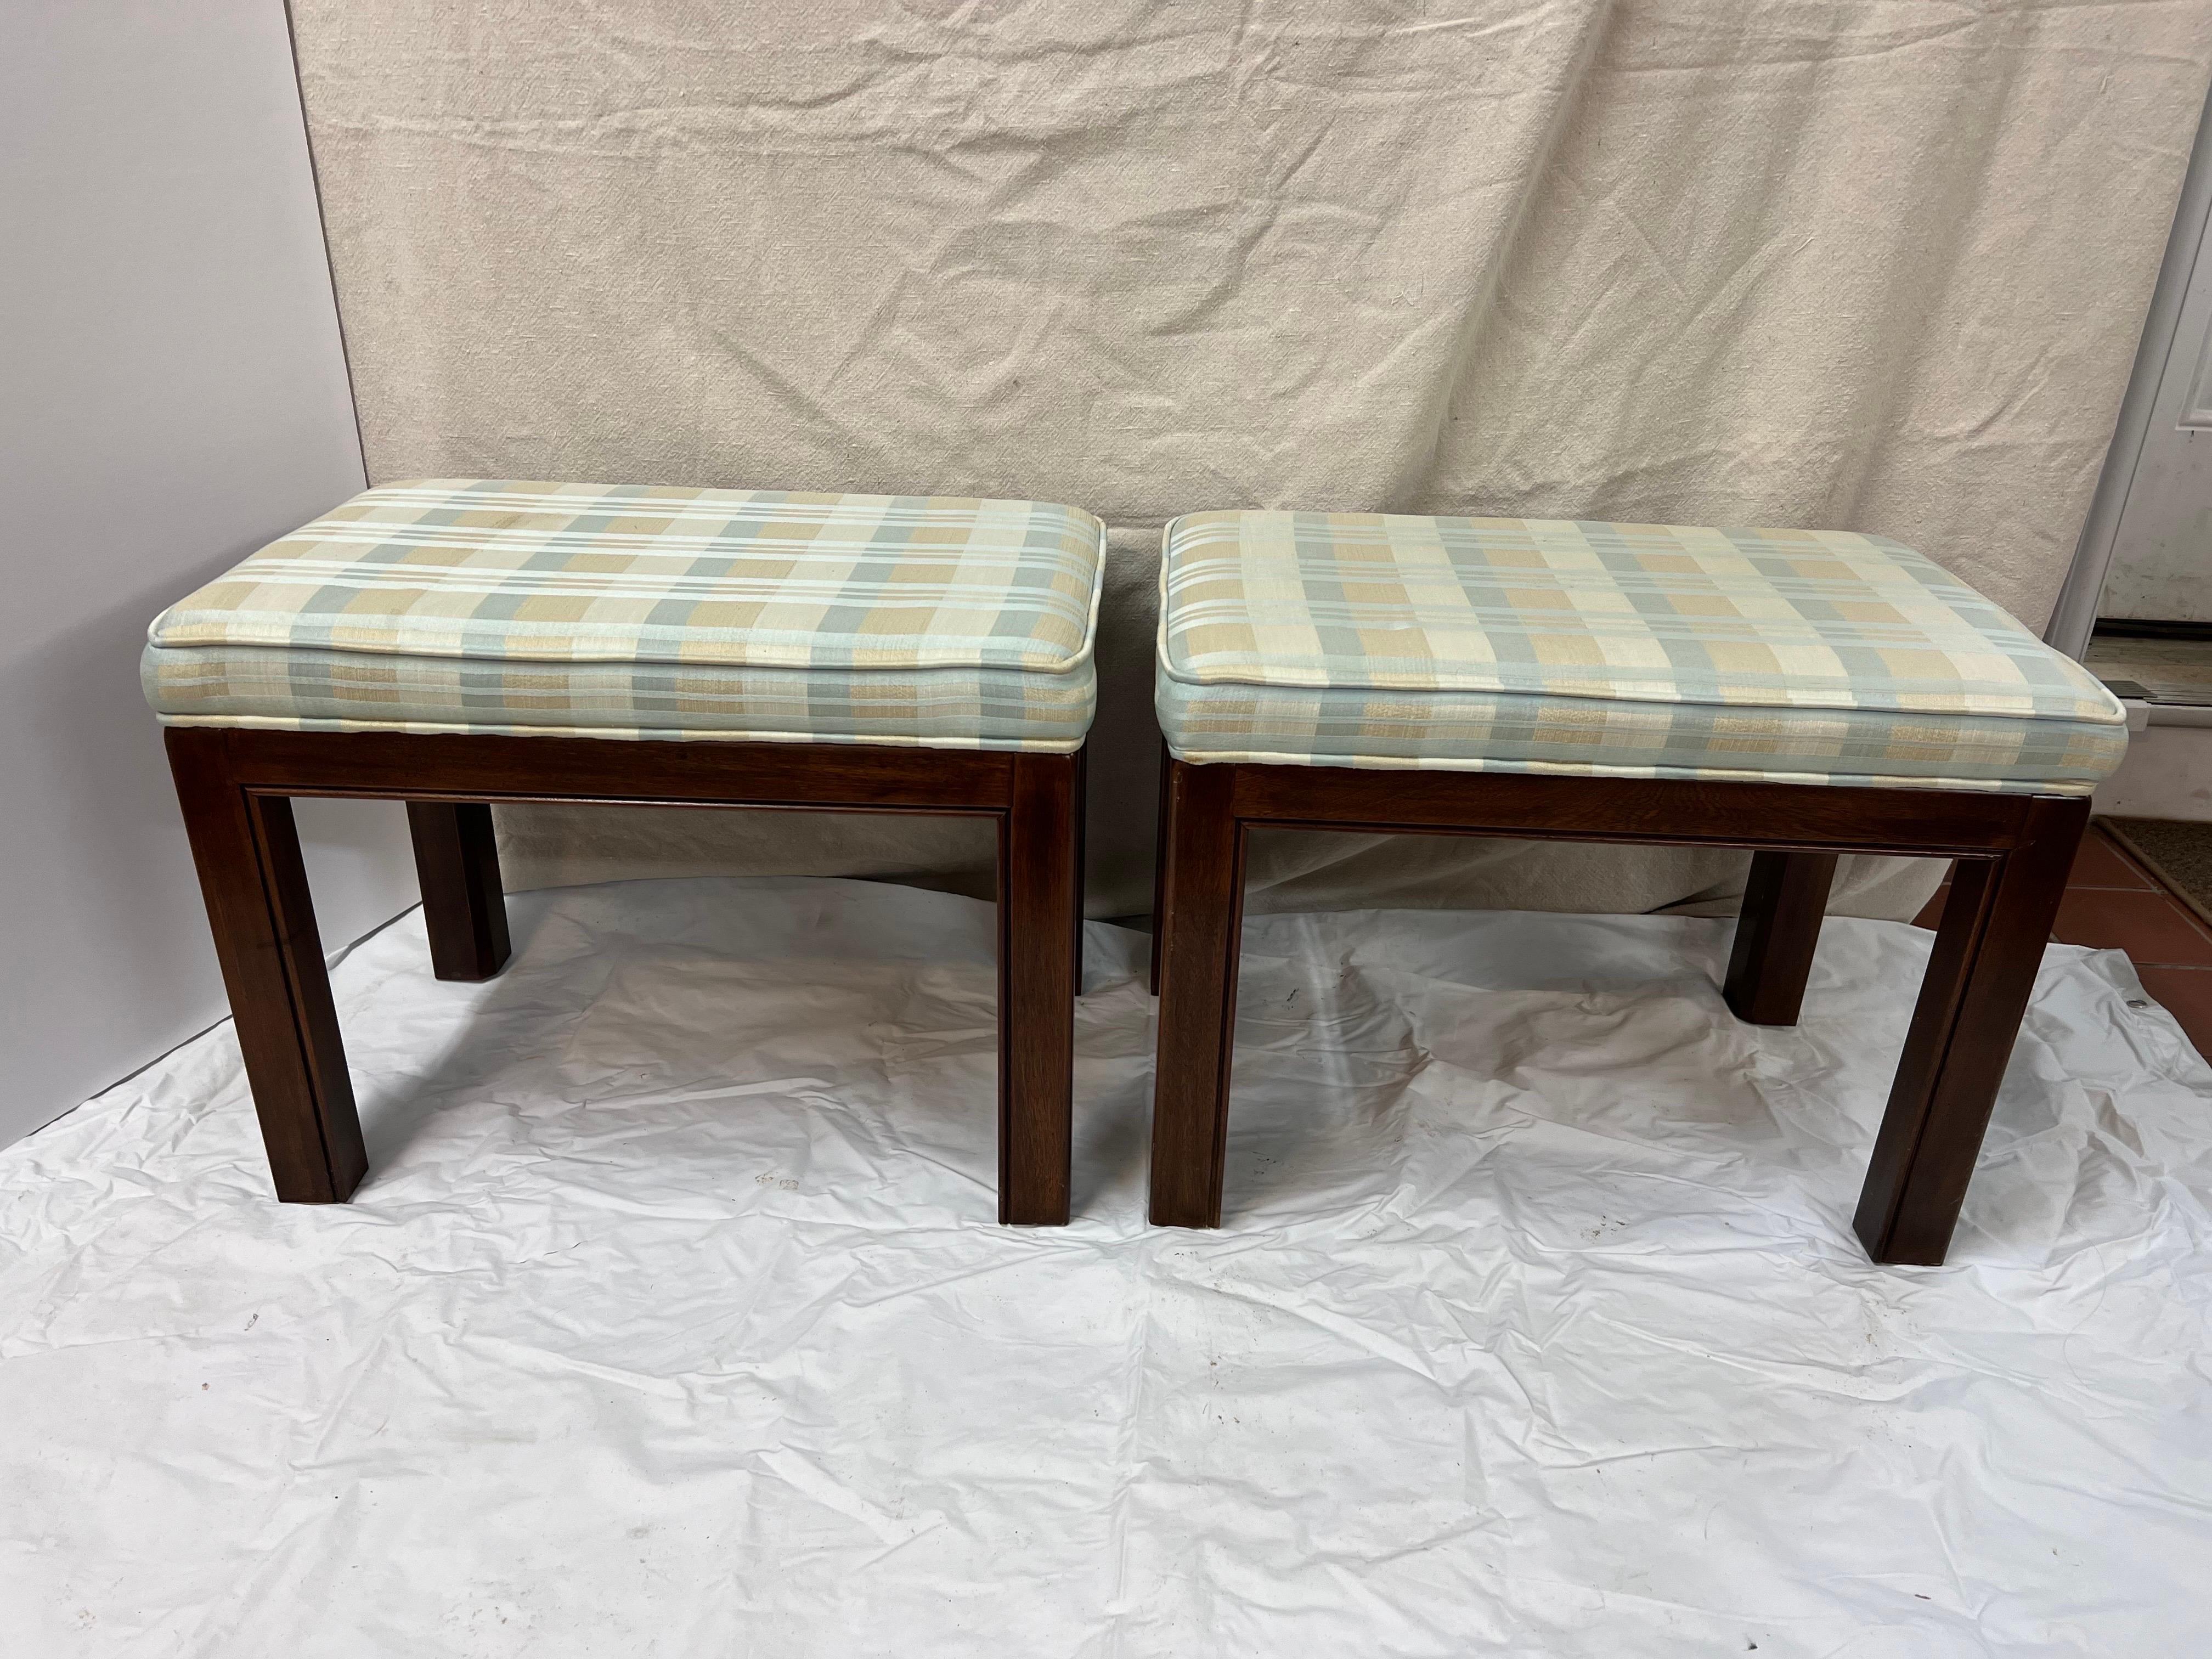 North American Pair of Drexel Heritage Ottomans or Stools